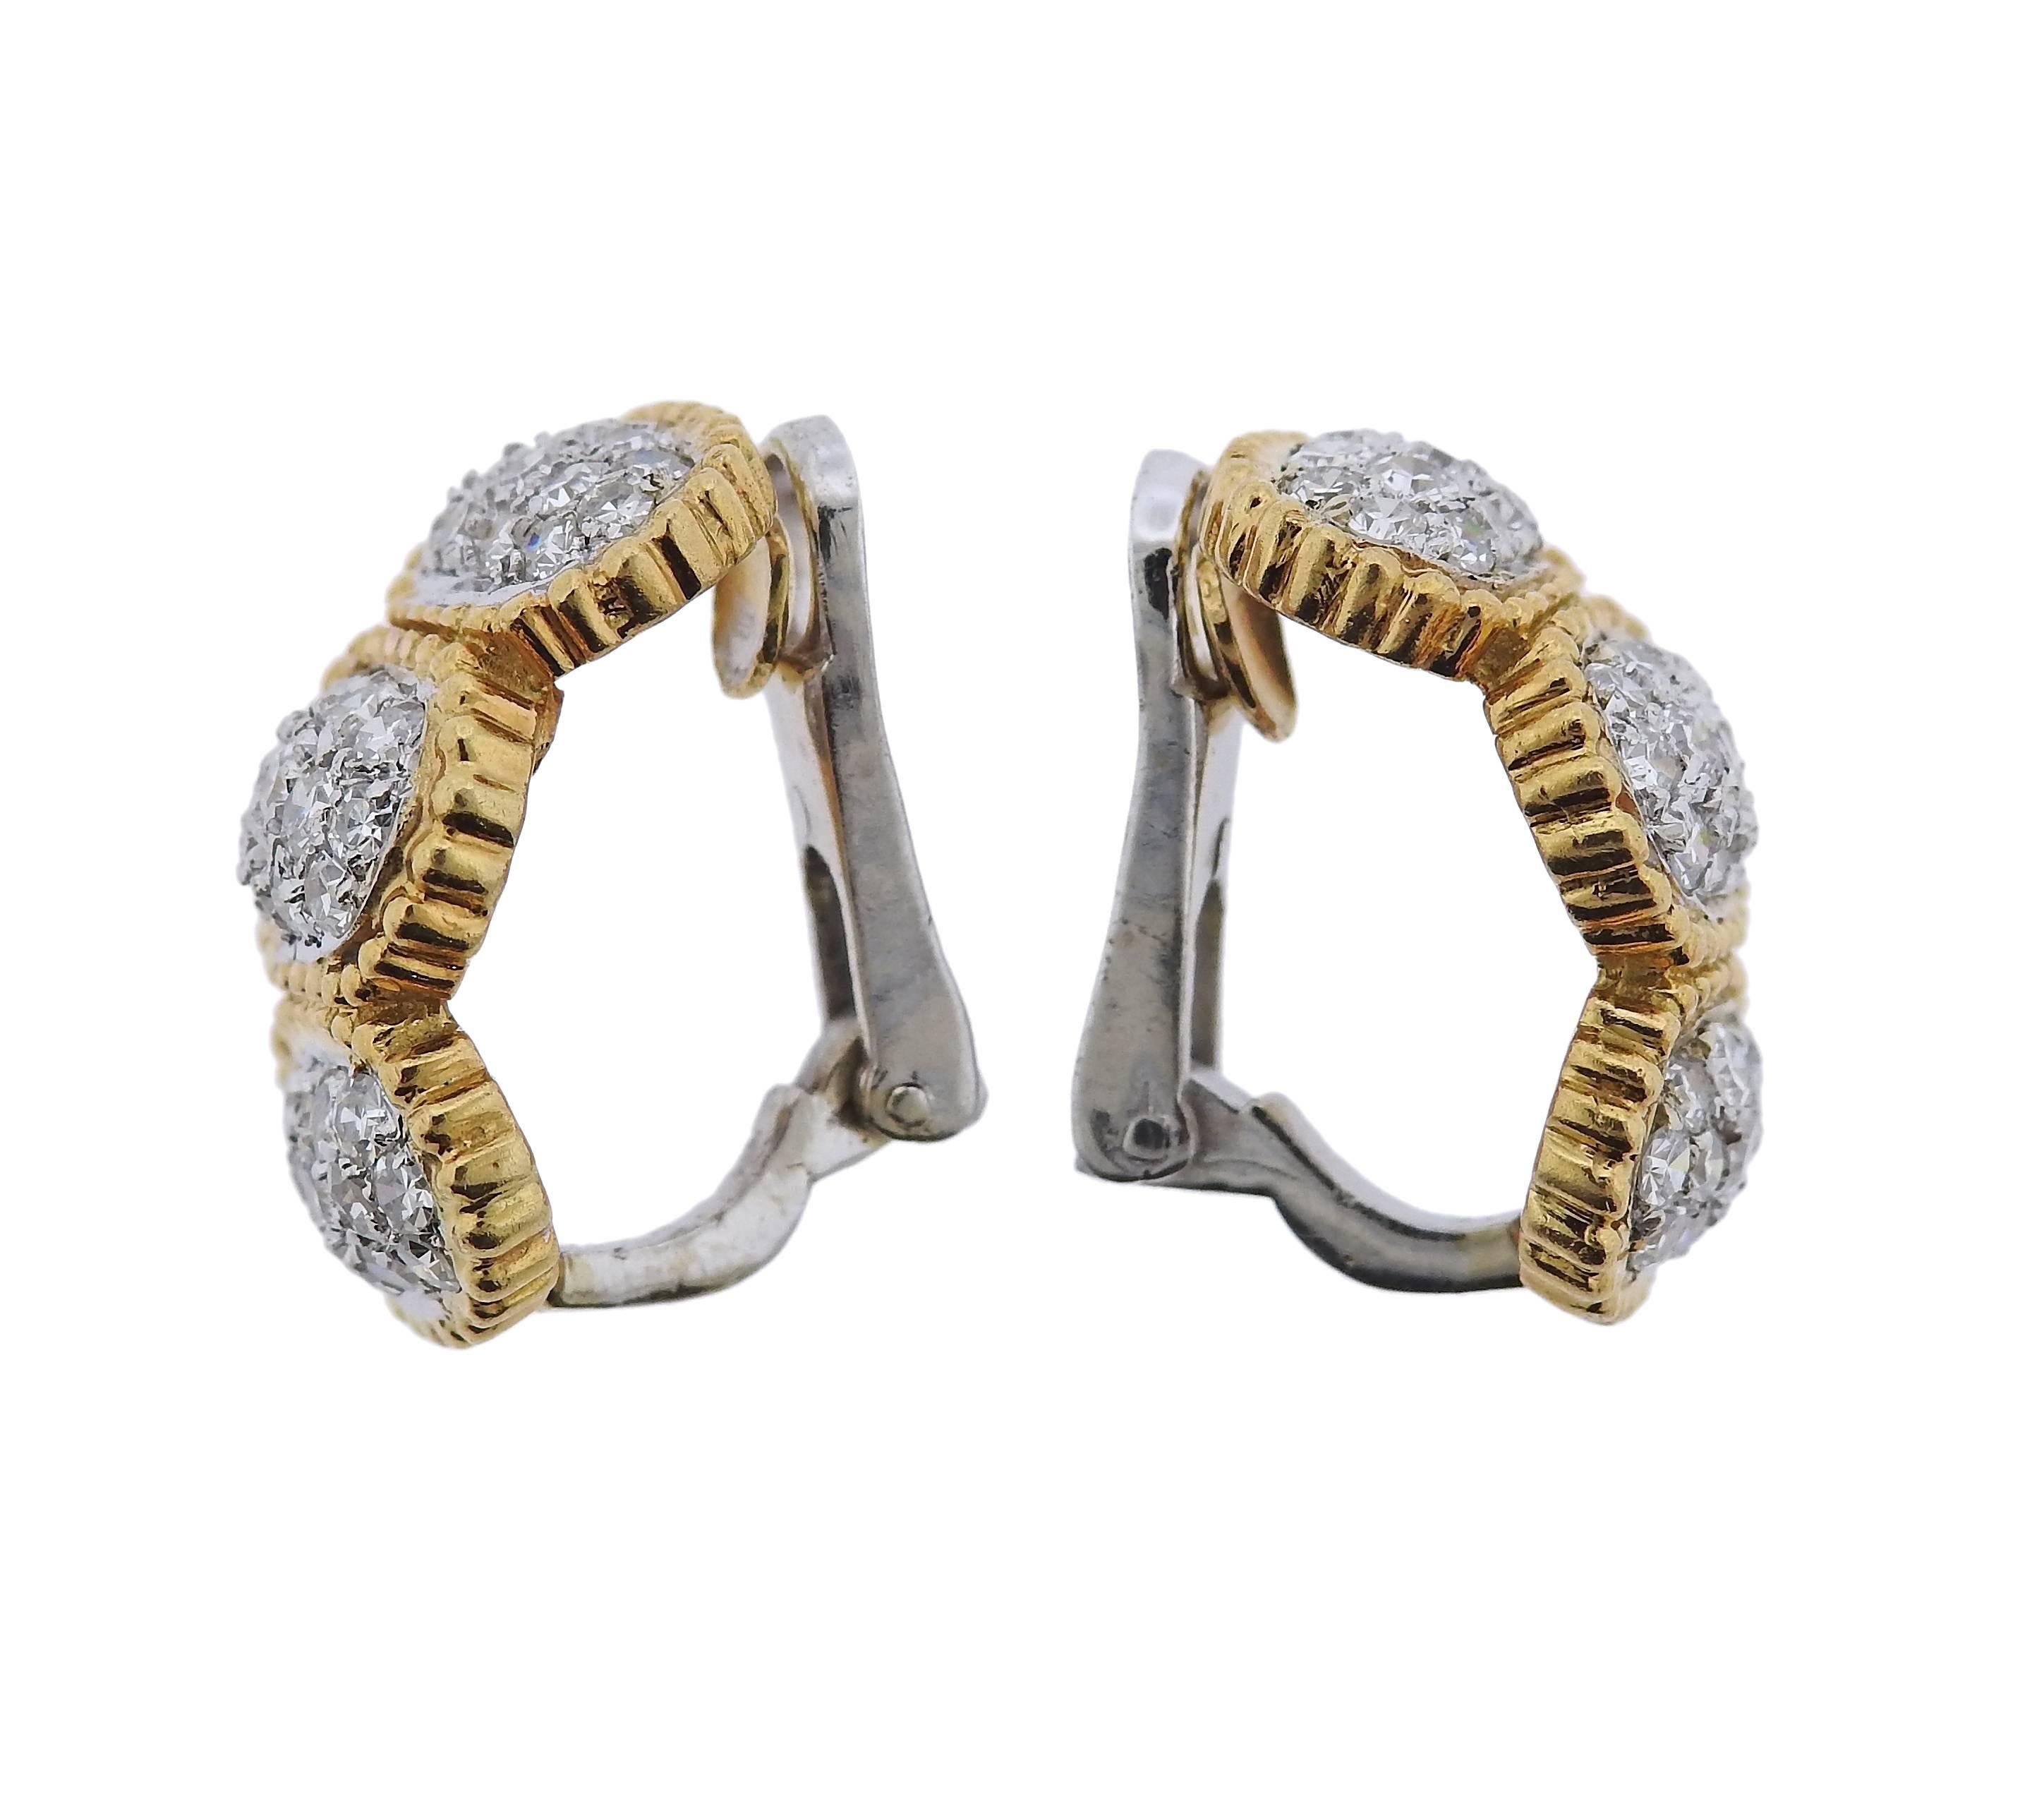 Pair of 18k gold half hoop earrings, set with approximately 0.80ctw in diamonds. Earrings are 20mm x 11mm, weigh 10.7 grams.